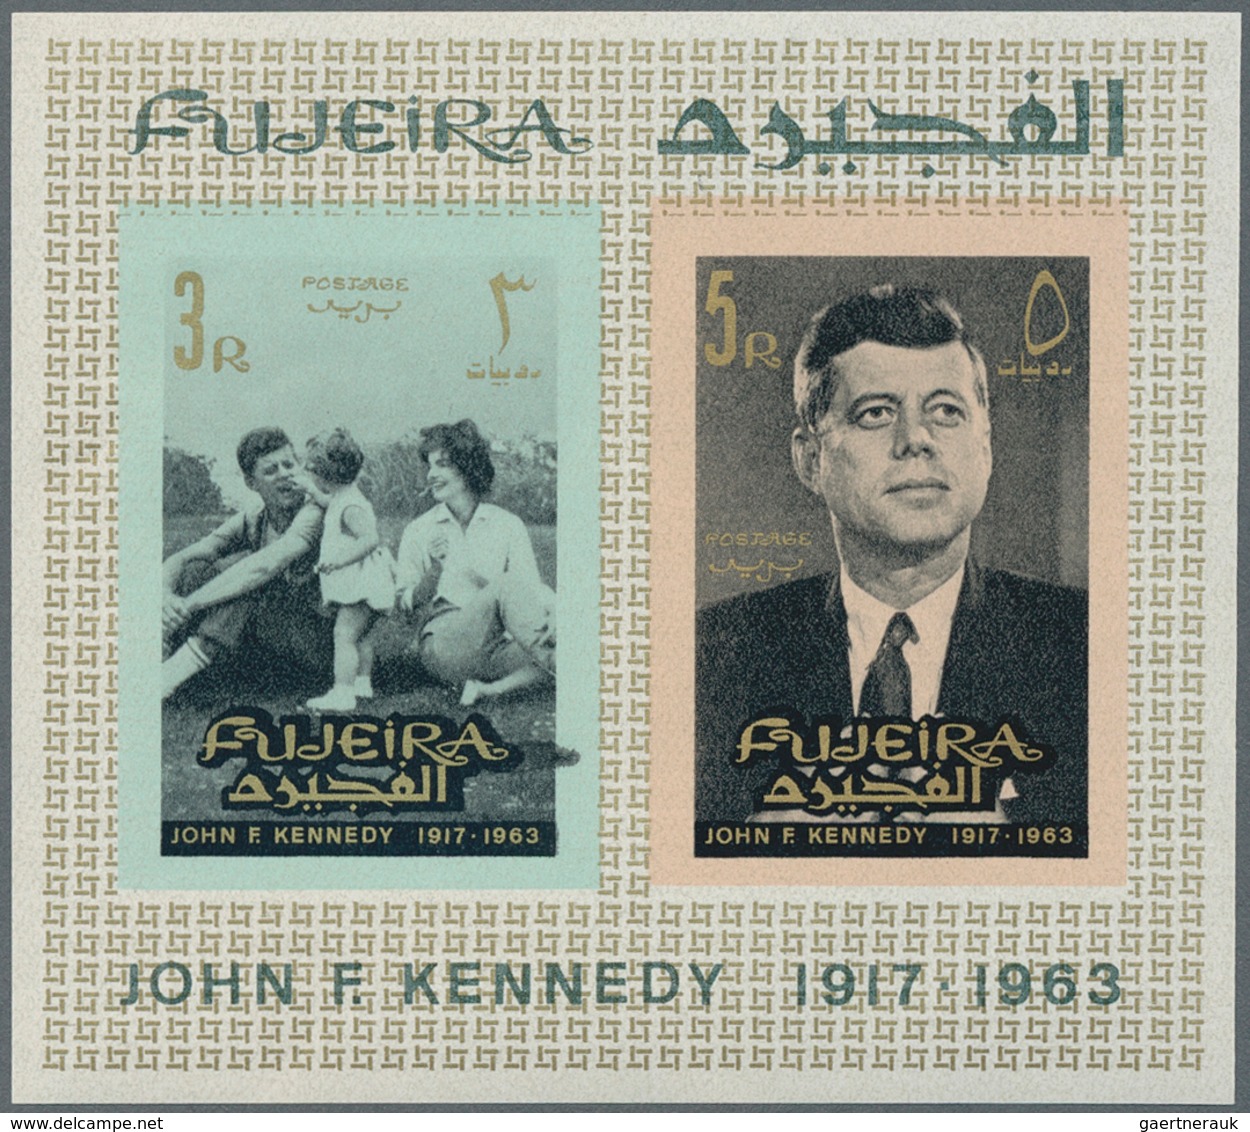 Fudschaira / Fujeira: 1964/1969, Lot Of 9166 IMPERFORATE (instead Of Perforate) Stamps MNH, Showing - Fujeira